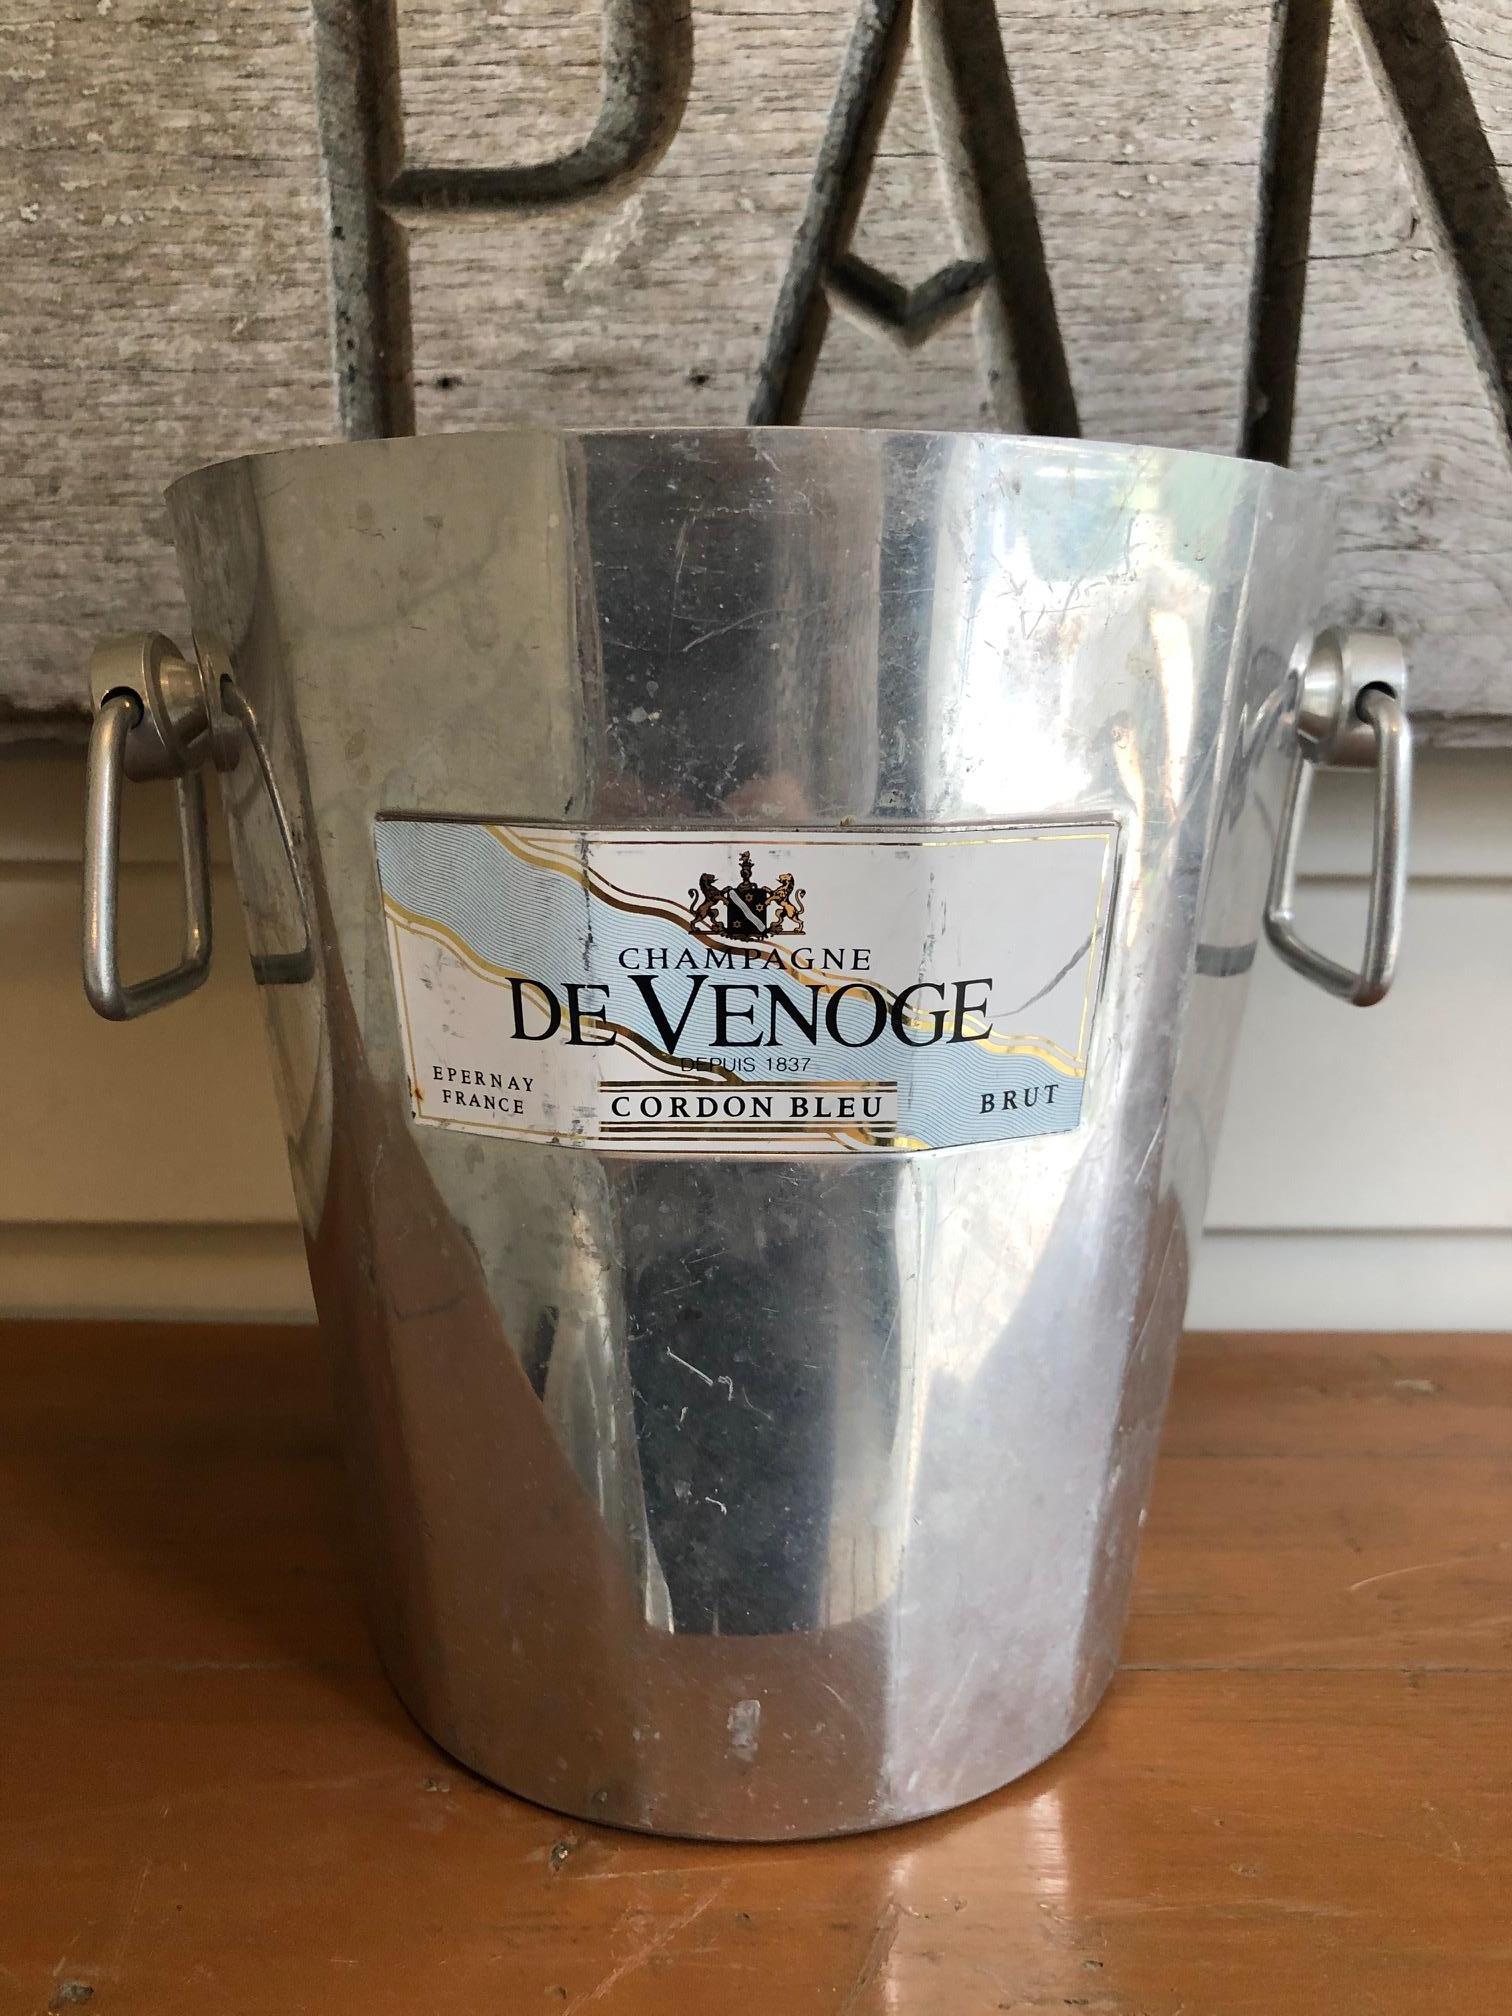 Wonderfully graphic vintage French champagne buckets wine coolers, most stamped Argit, having silver aluminum with Classic tapered shape, some with knob handles on either side. Most have decorative ribs near the bottom and top and graphic black and